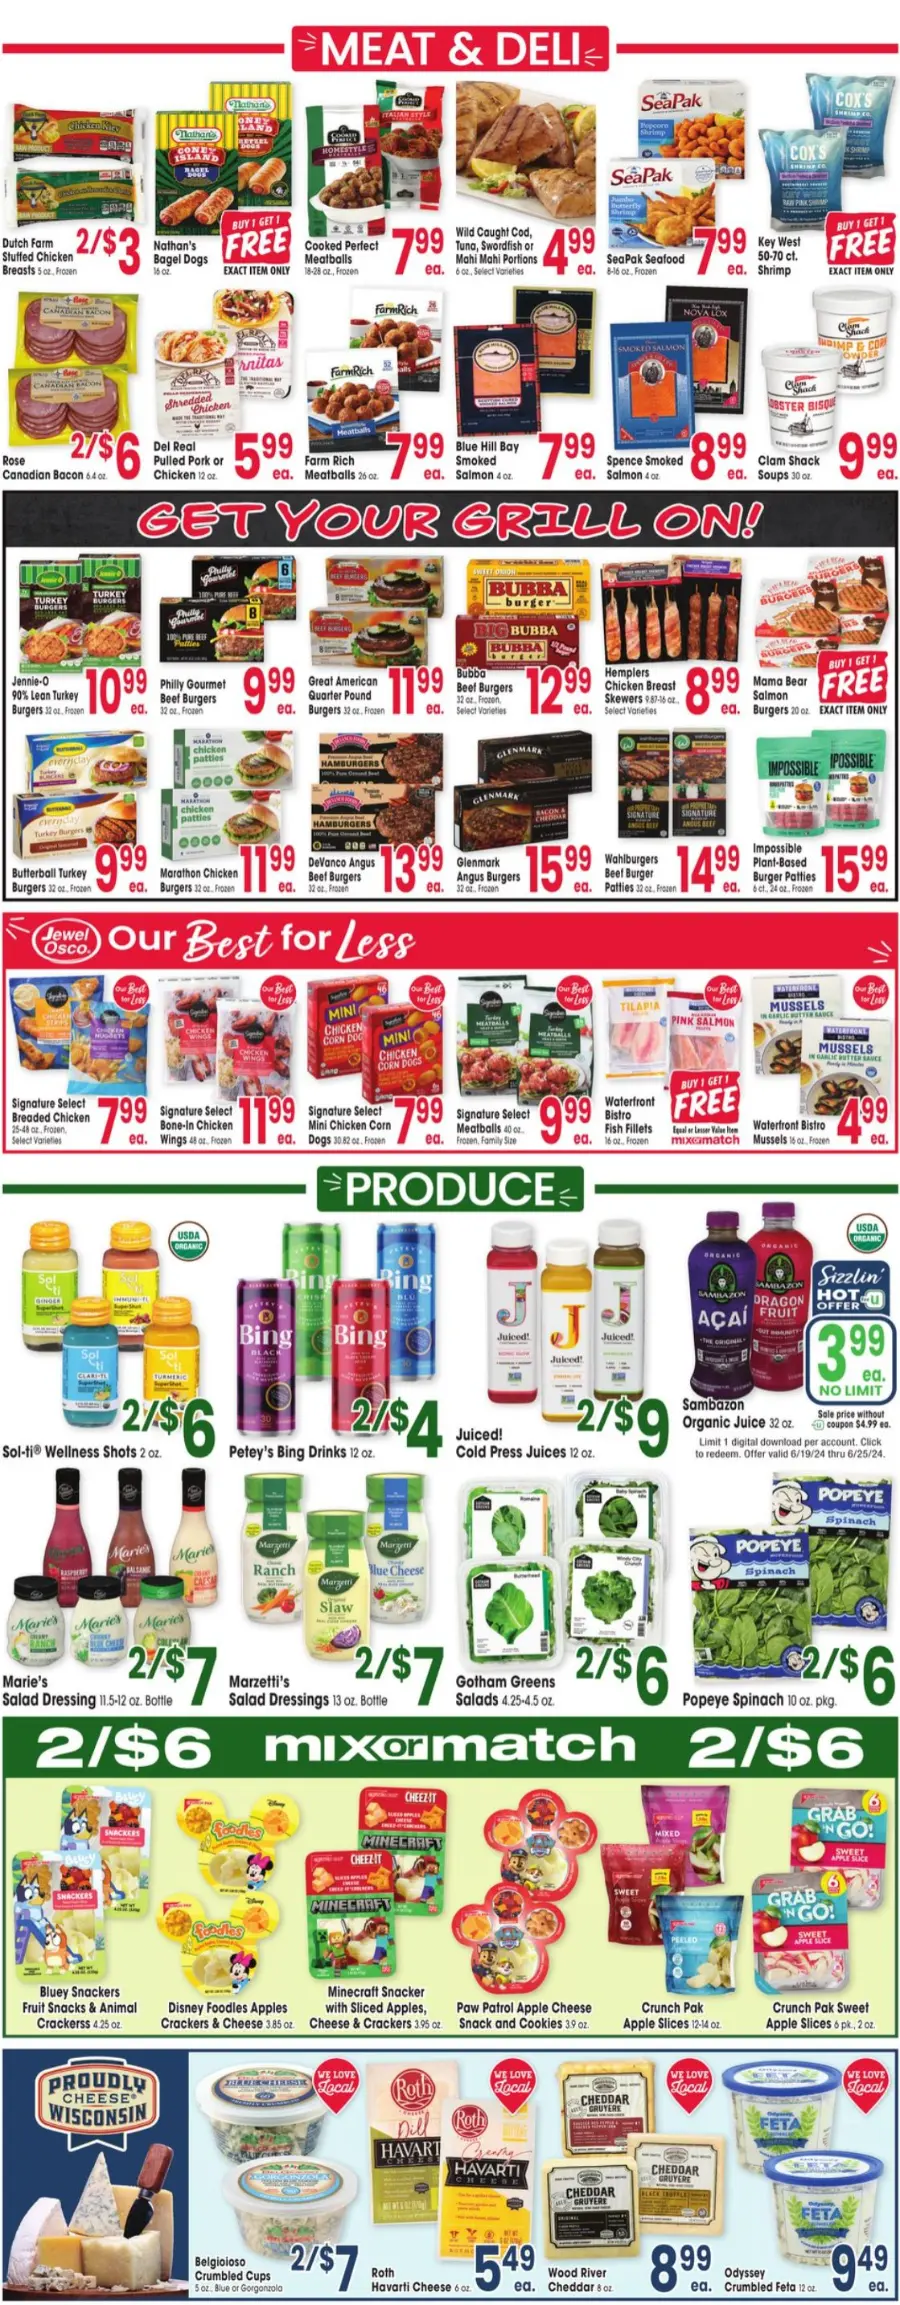 Jewel Osco July 2024 Weekly Sales, Deals, Discounts and Digital Coupons.